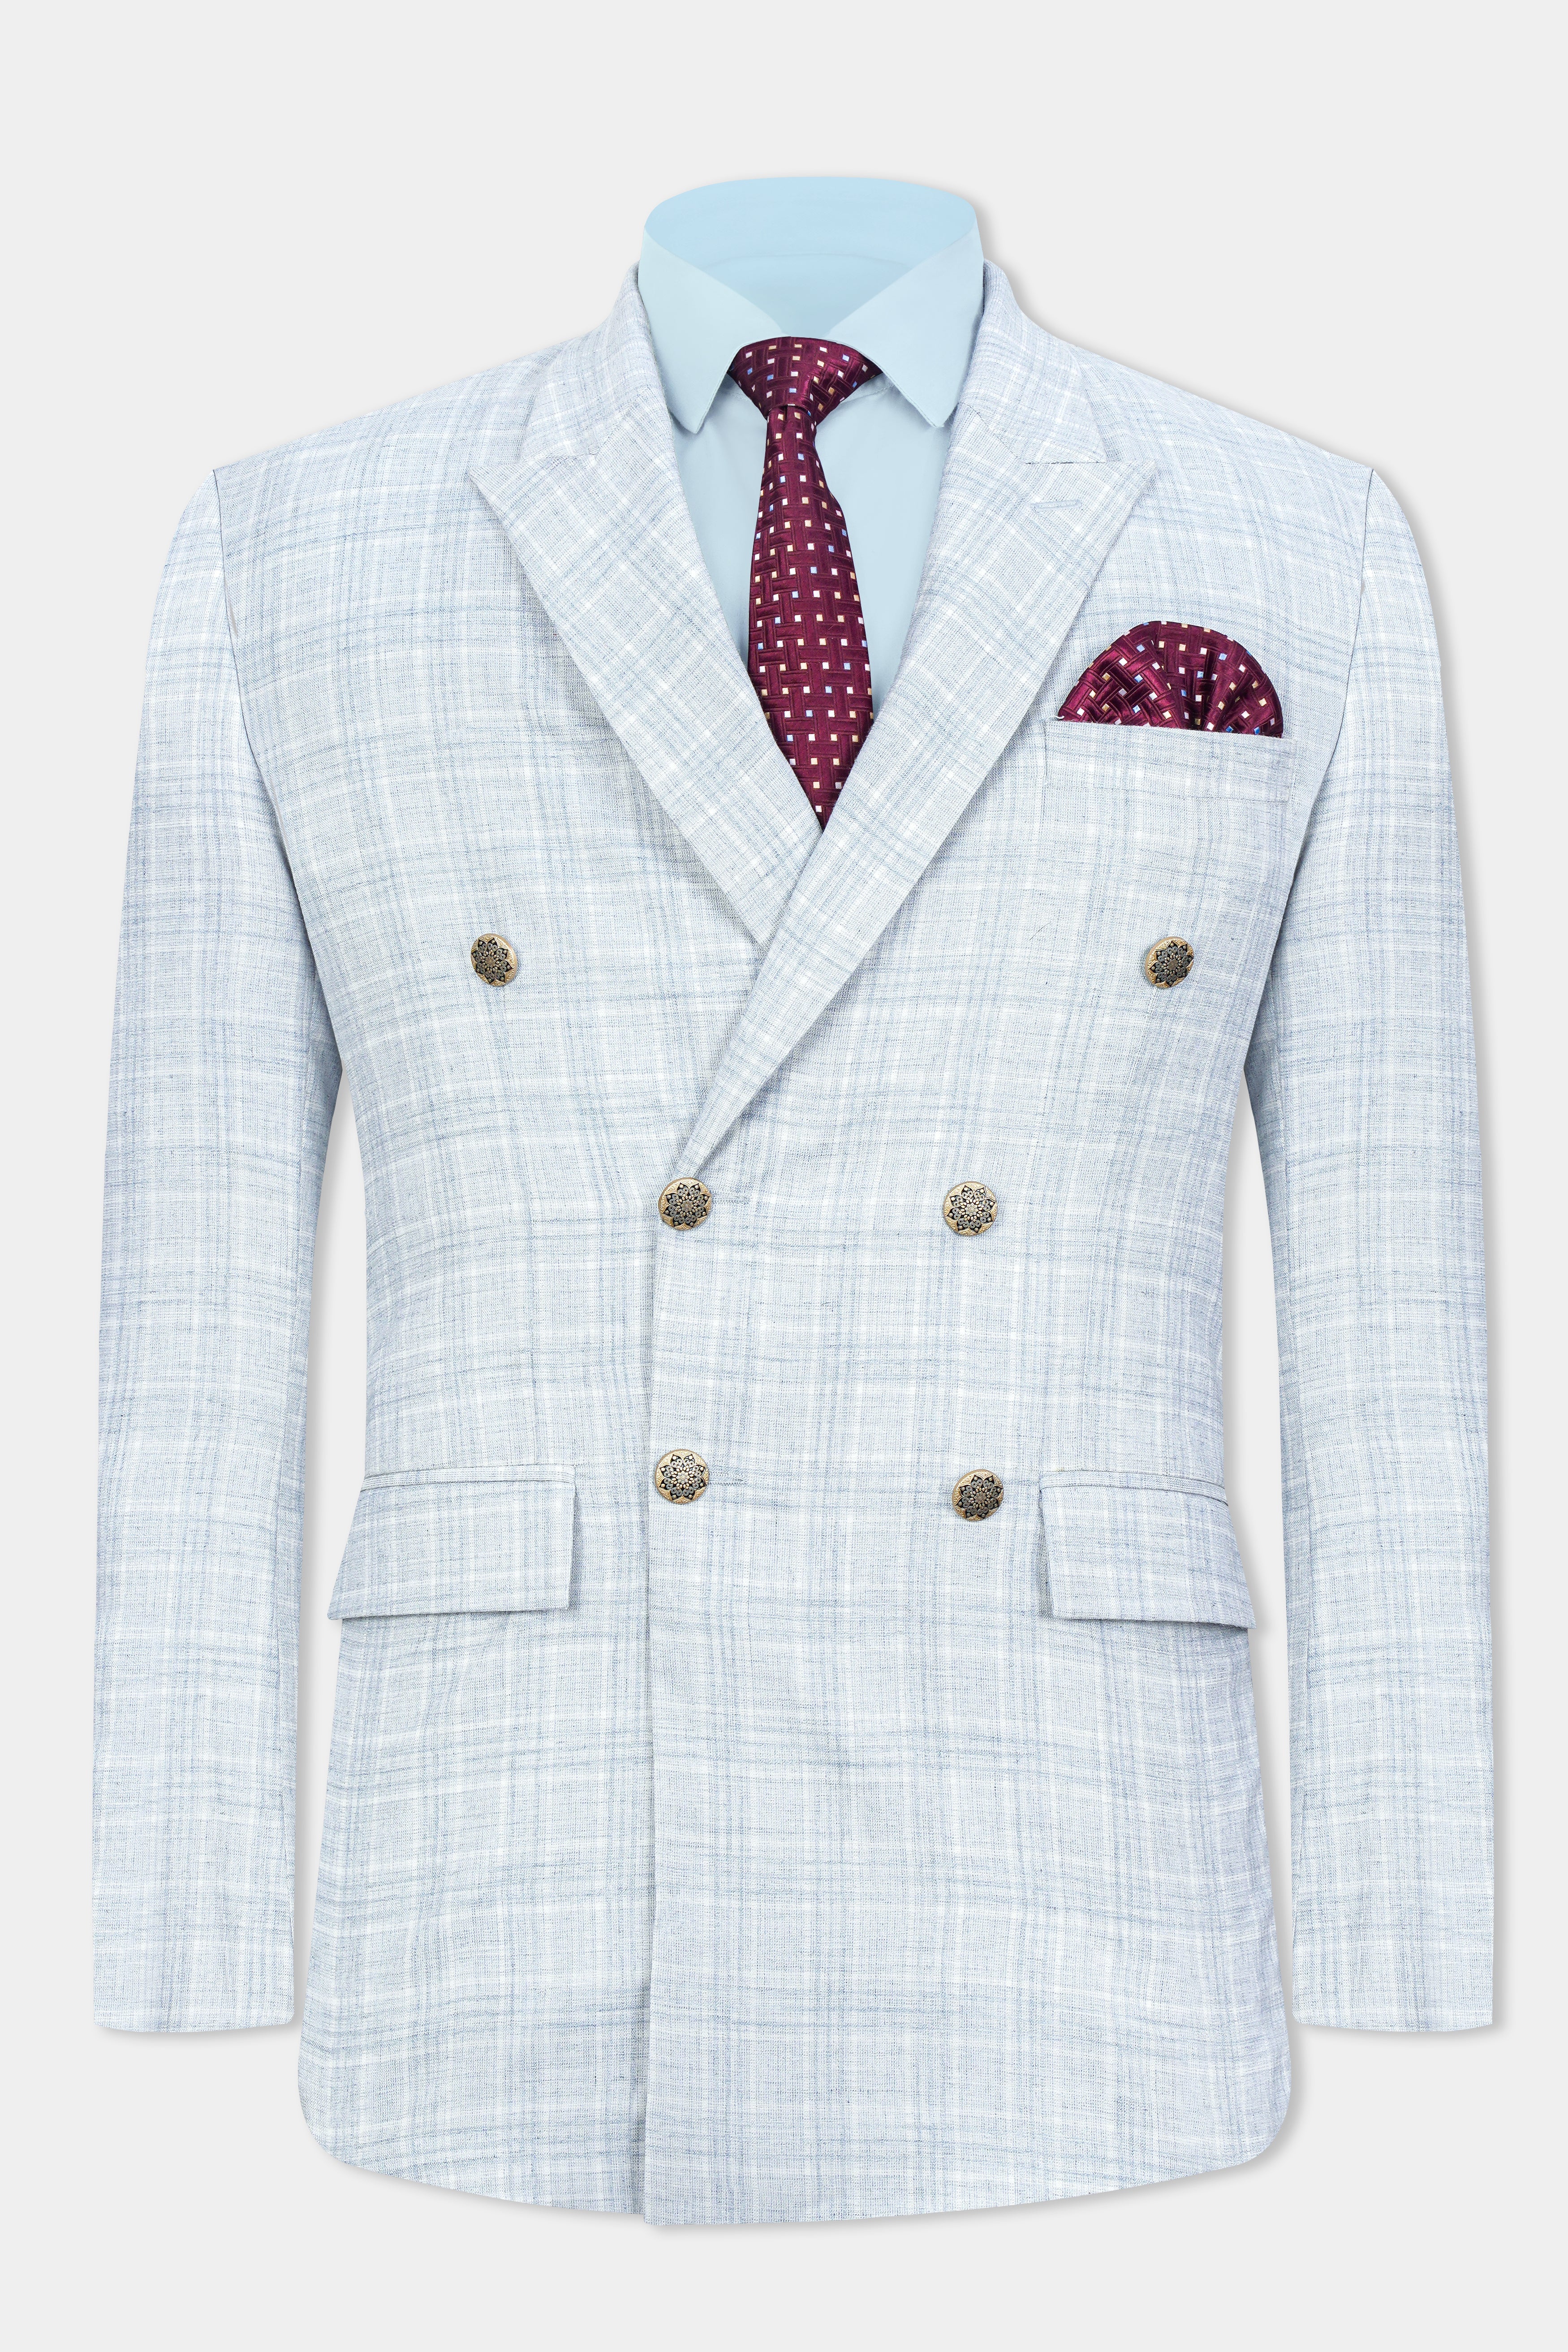 Gainsboro Blue Plaid Wool Rich Double Breasted Suit ST3076-DB-GB-36, ST3076-DB-GB-38, ST3076-DB-GB-40, ST3076-DB-GB-42, ST3076-DB-GB-44, ST3076-DB-GB-46, ST3076-DB-GB-48, ST3076-DB-GB-50, ST3076-DB-GB-52, ST3076-DB-GB-54, ST3076-DB-GB-56, ST3076-DB-GB-58, ST3076-DB-GB-60